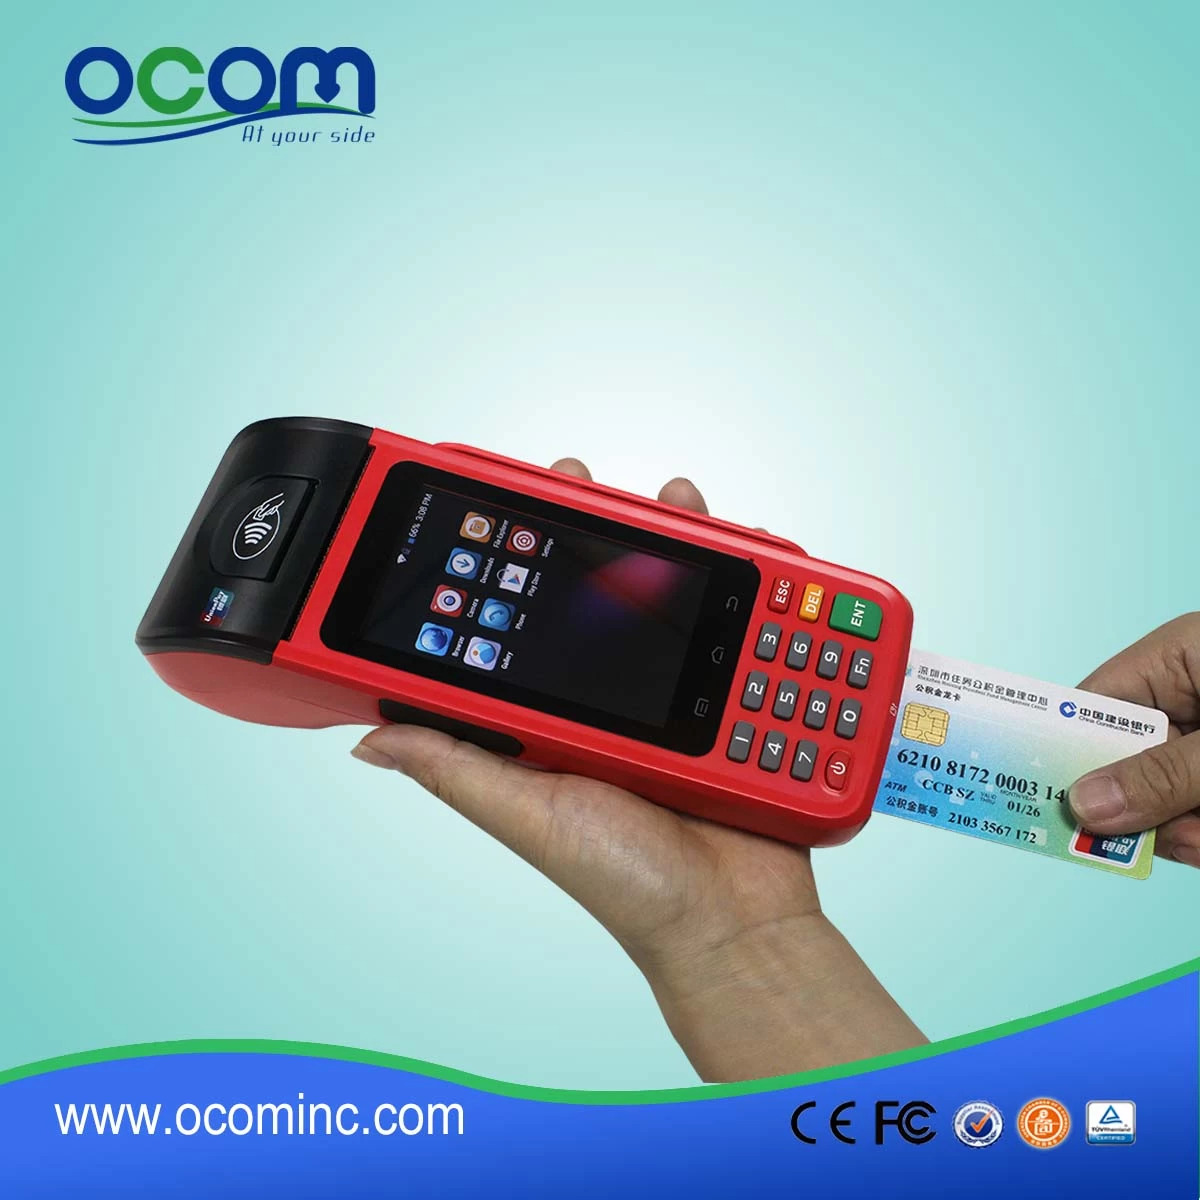 P8000 Wireless Android 3g Handheld POS Terminal